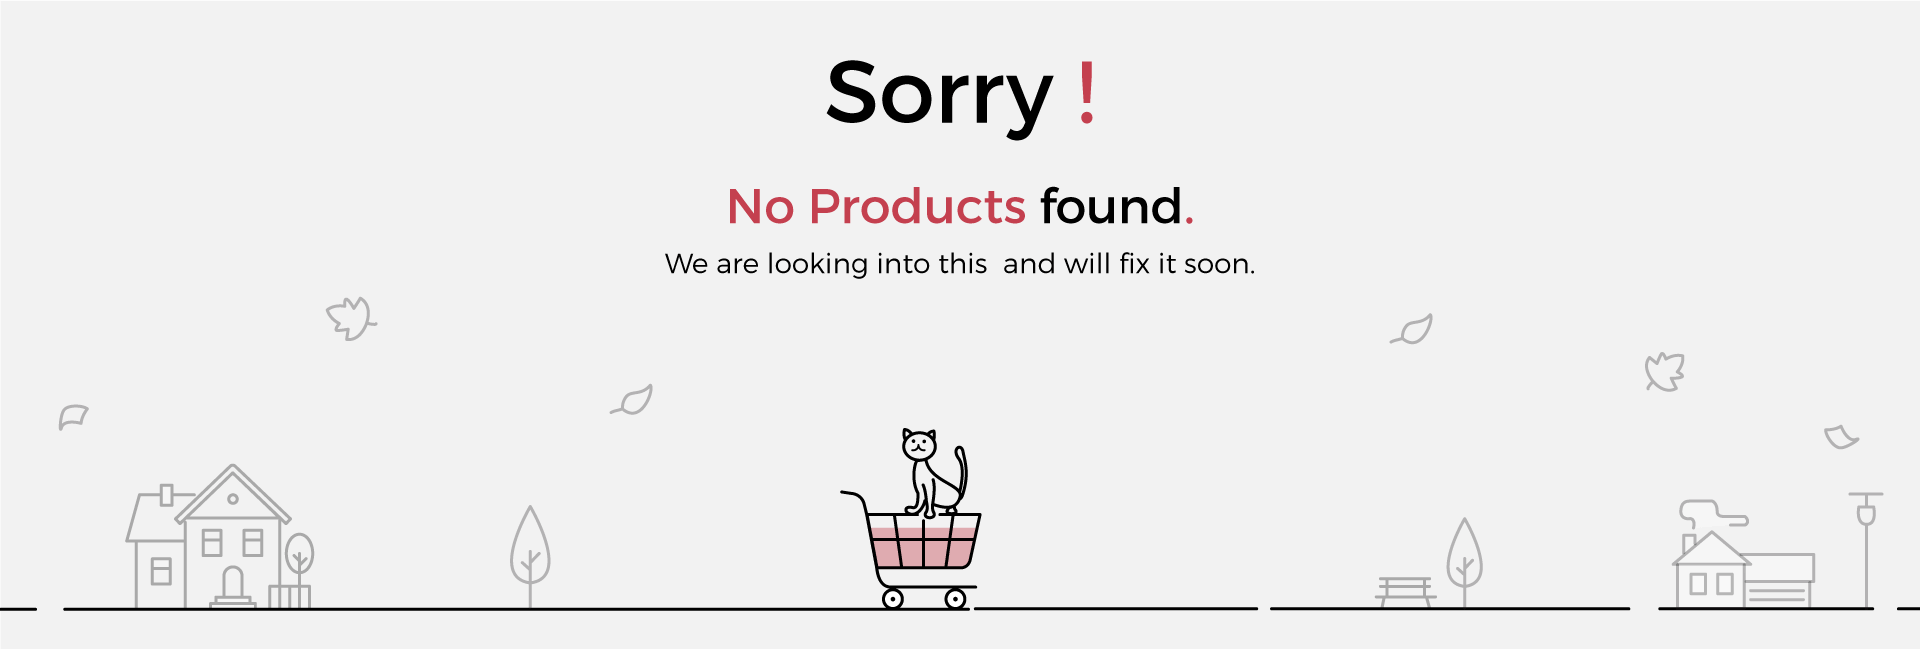 No Product